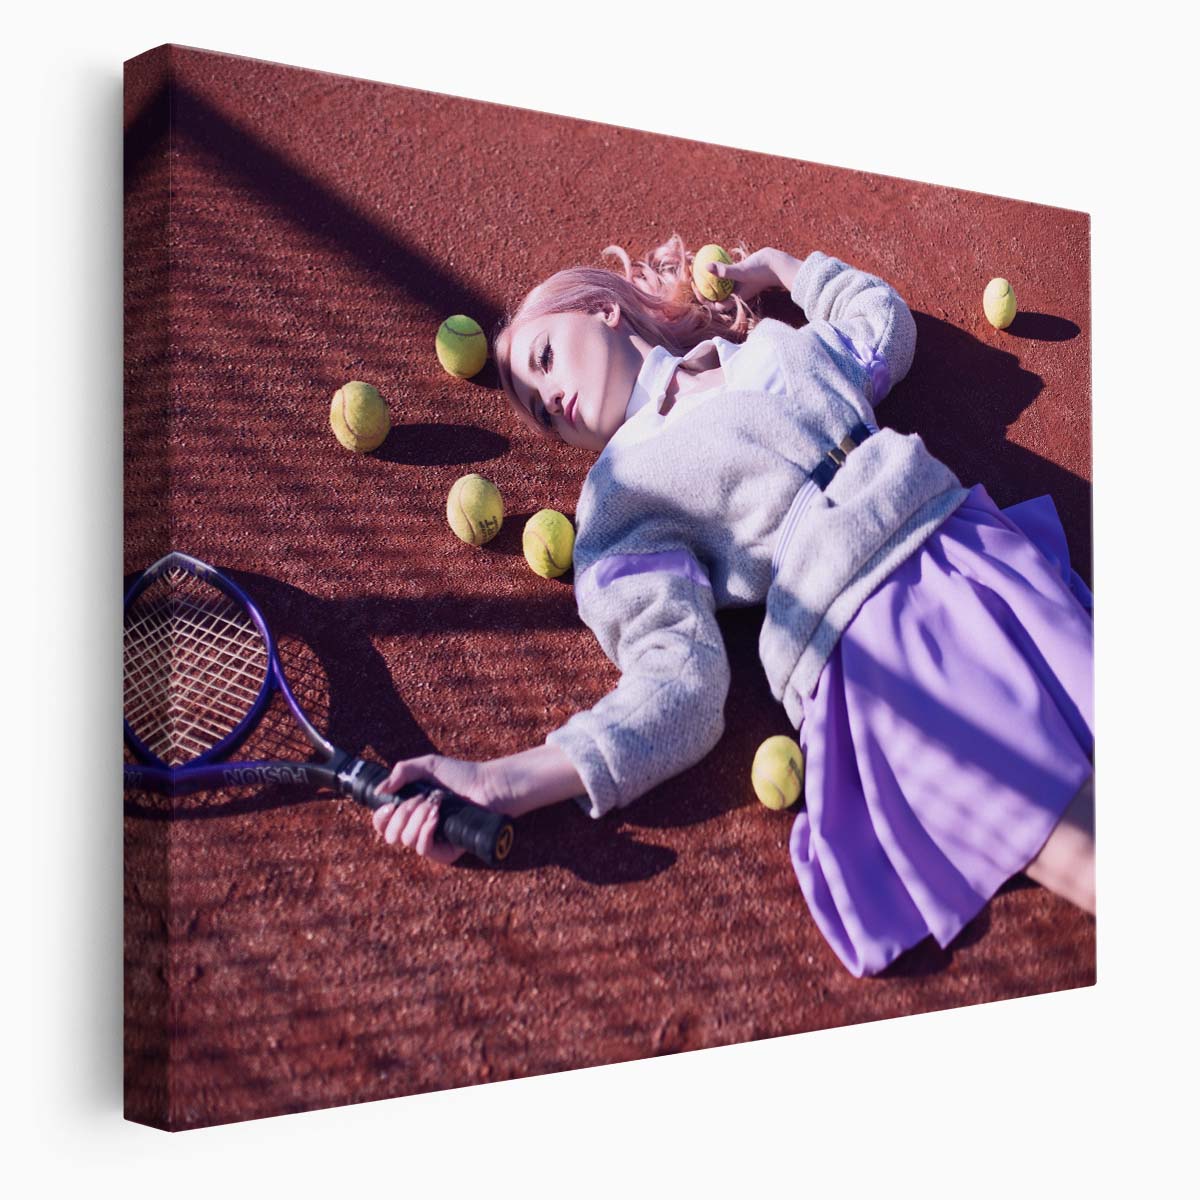 Tennis Girl in Action Fashionable Sports Portrait Photography Wall Art